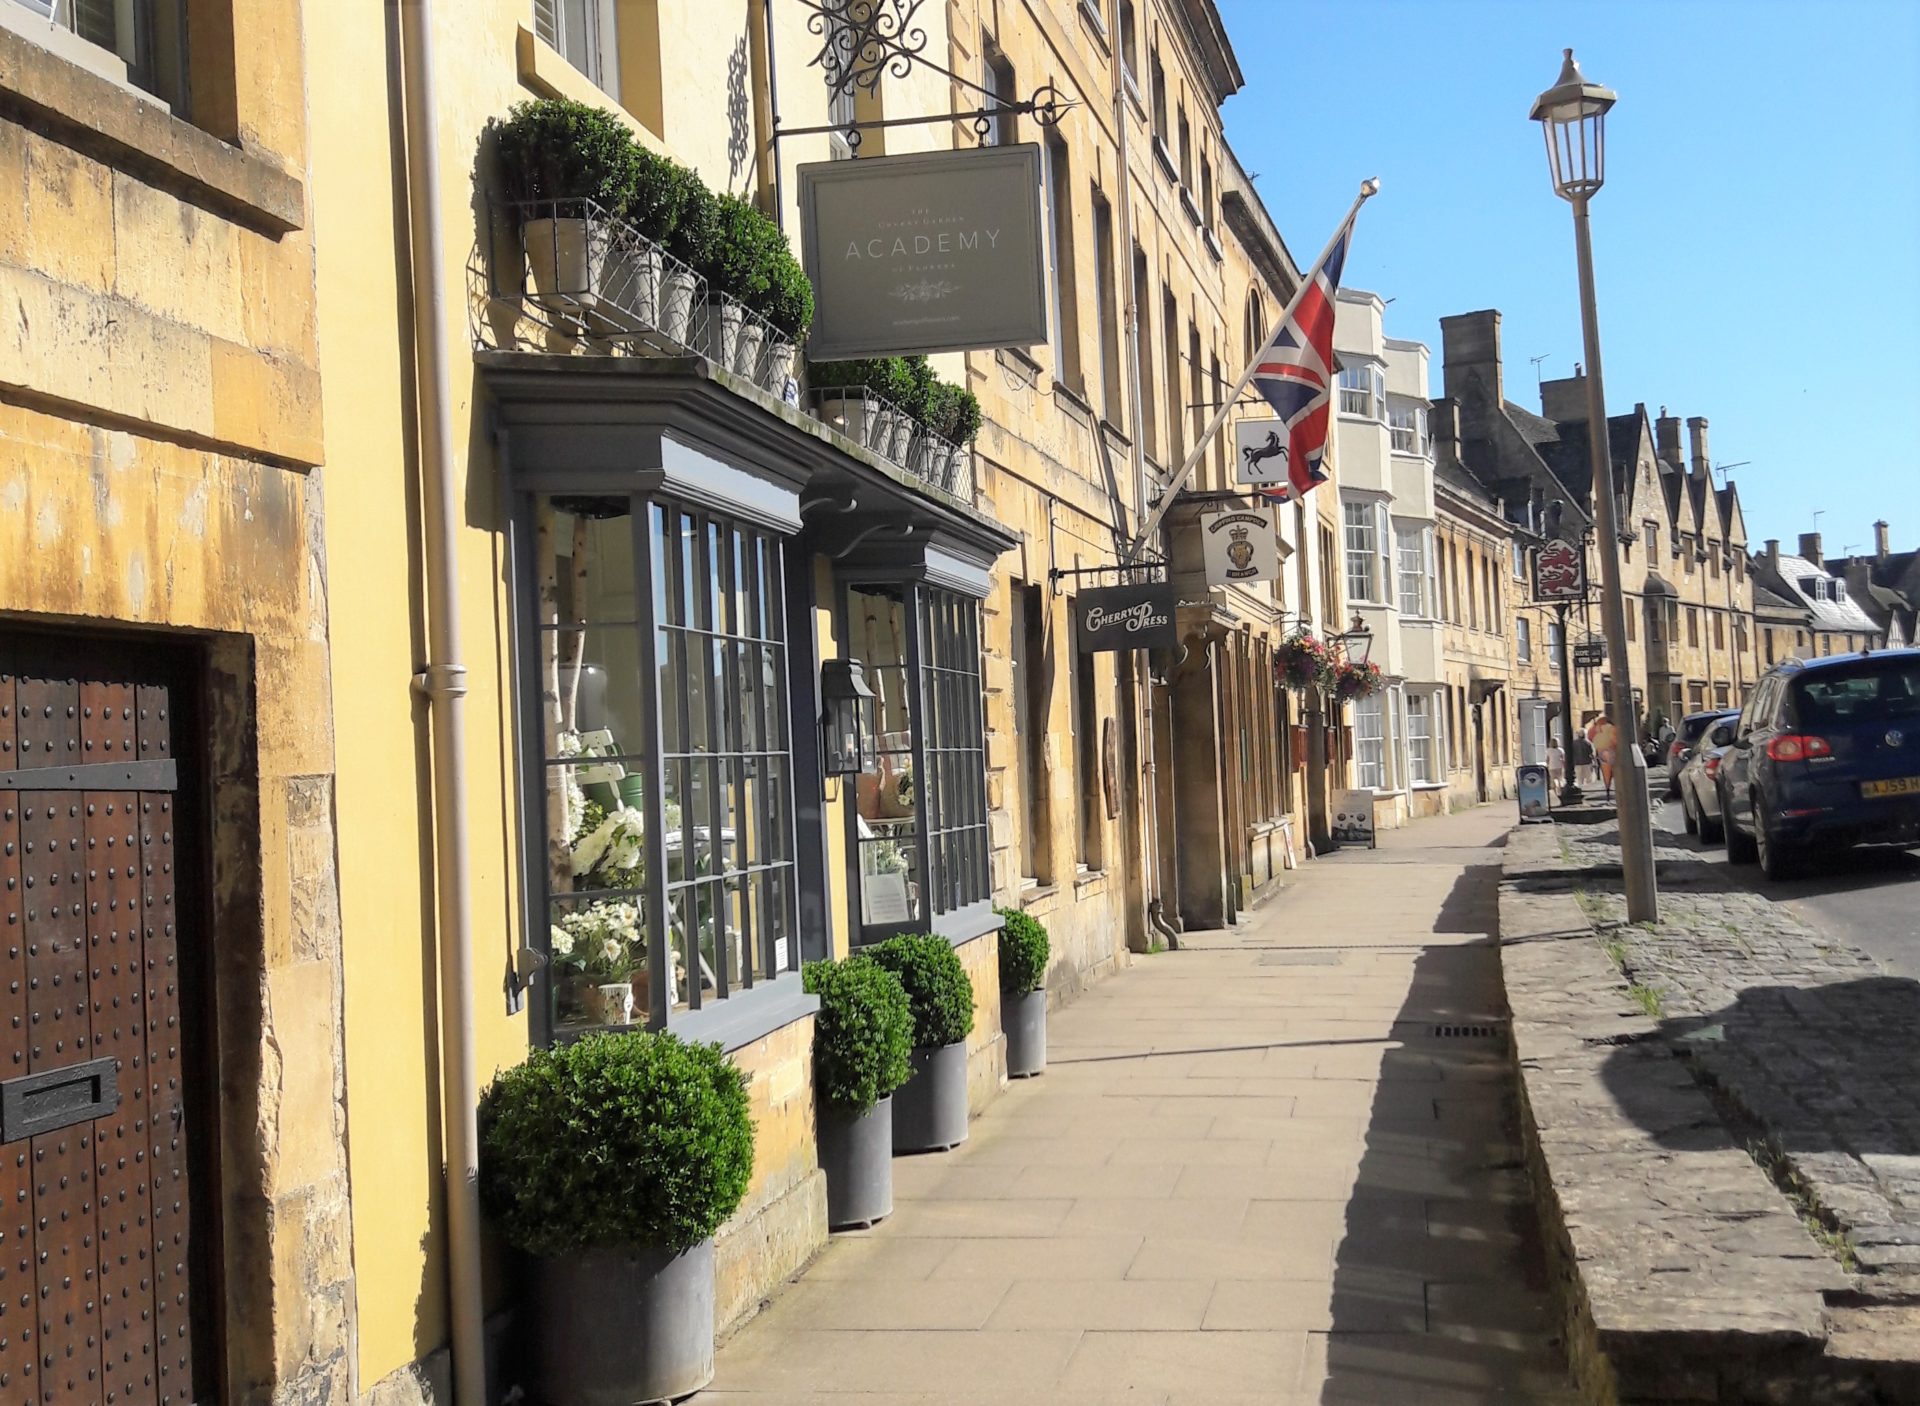 Glamping in Gloucestershire: View along Chipping Campden High Street